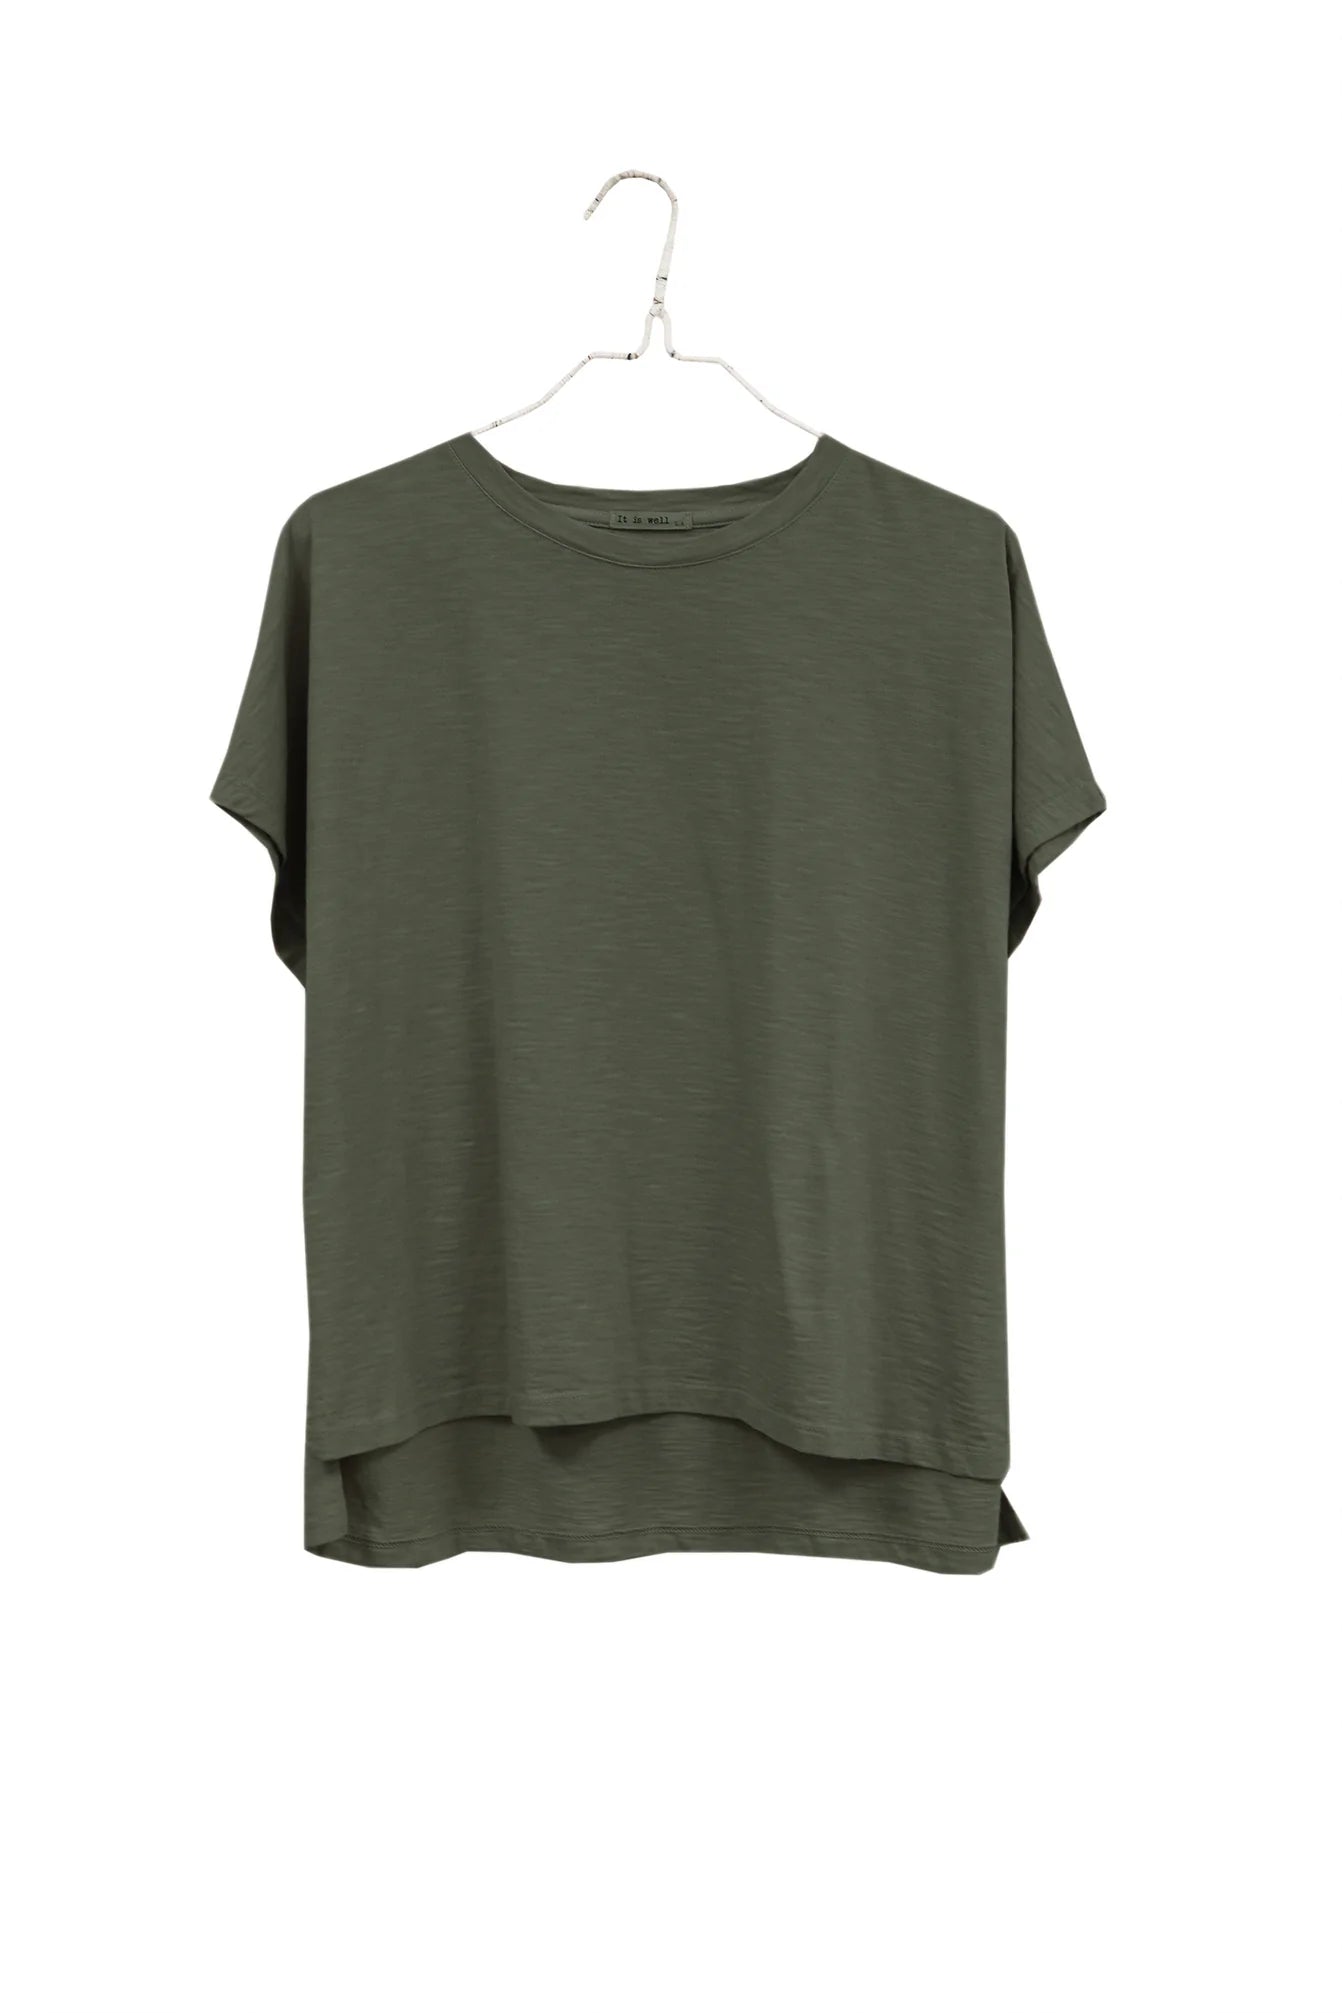 Everyday Boxy Tee in Olive